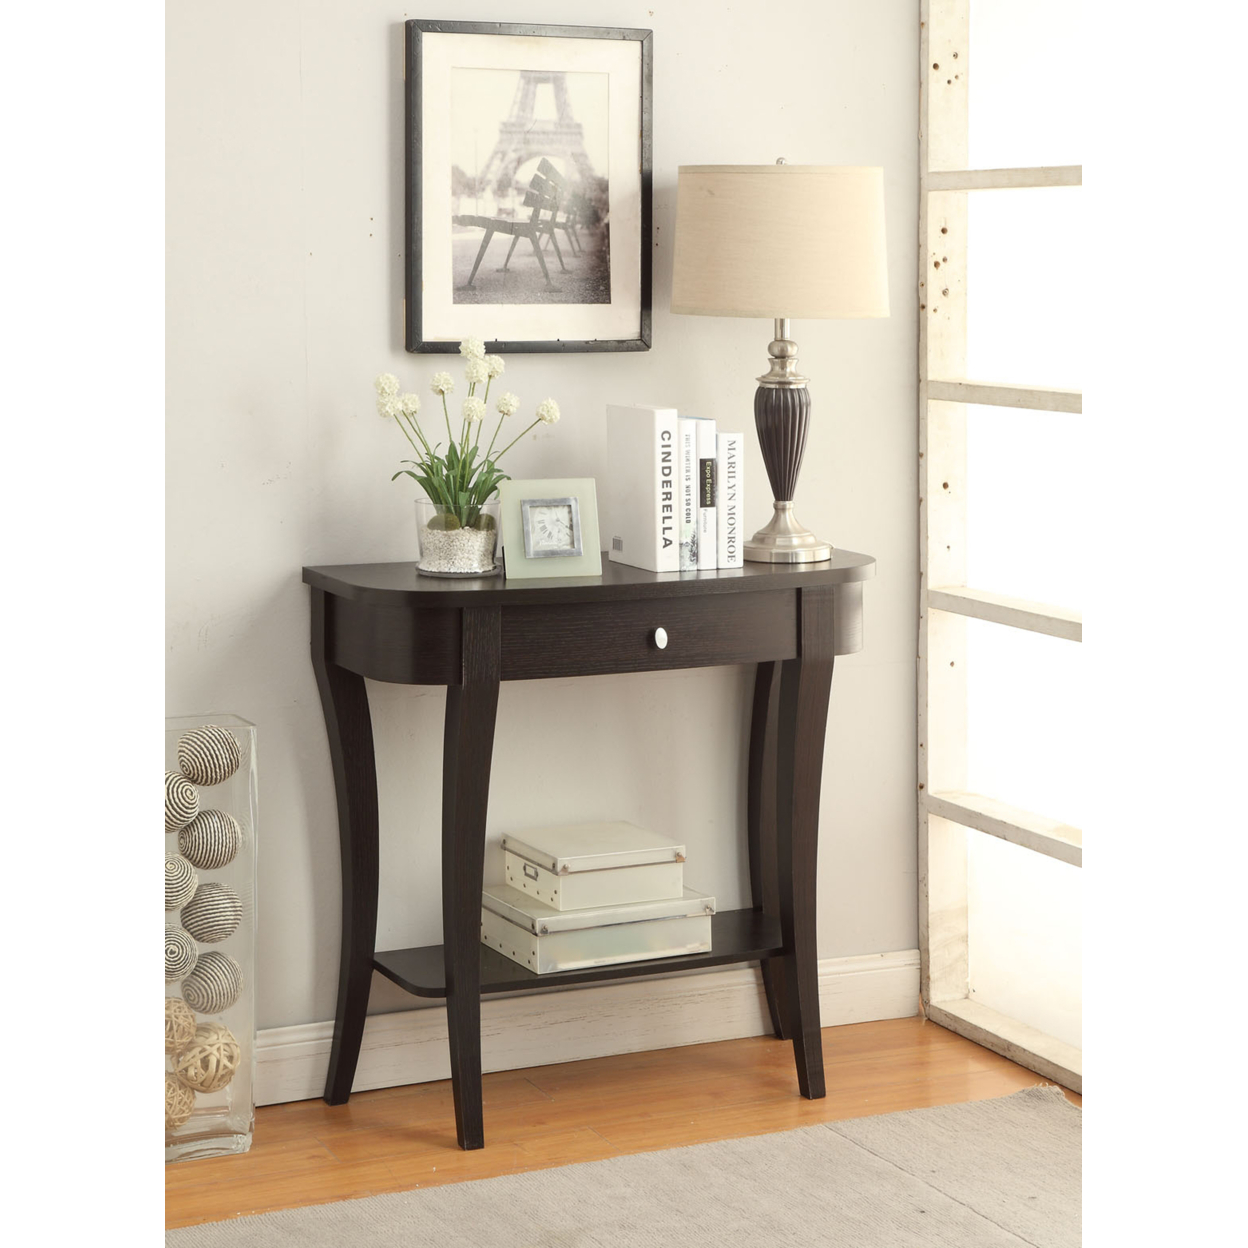 Convenience Concepts Newport Entryway Console Table, Multiple Finishes - image 1 of 2